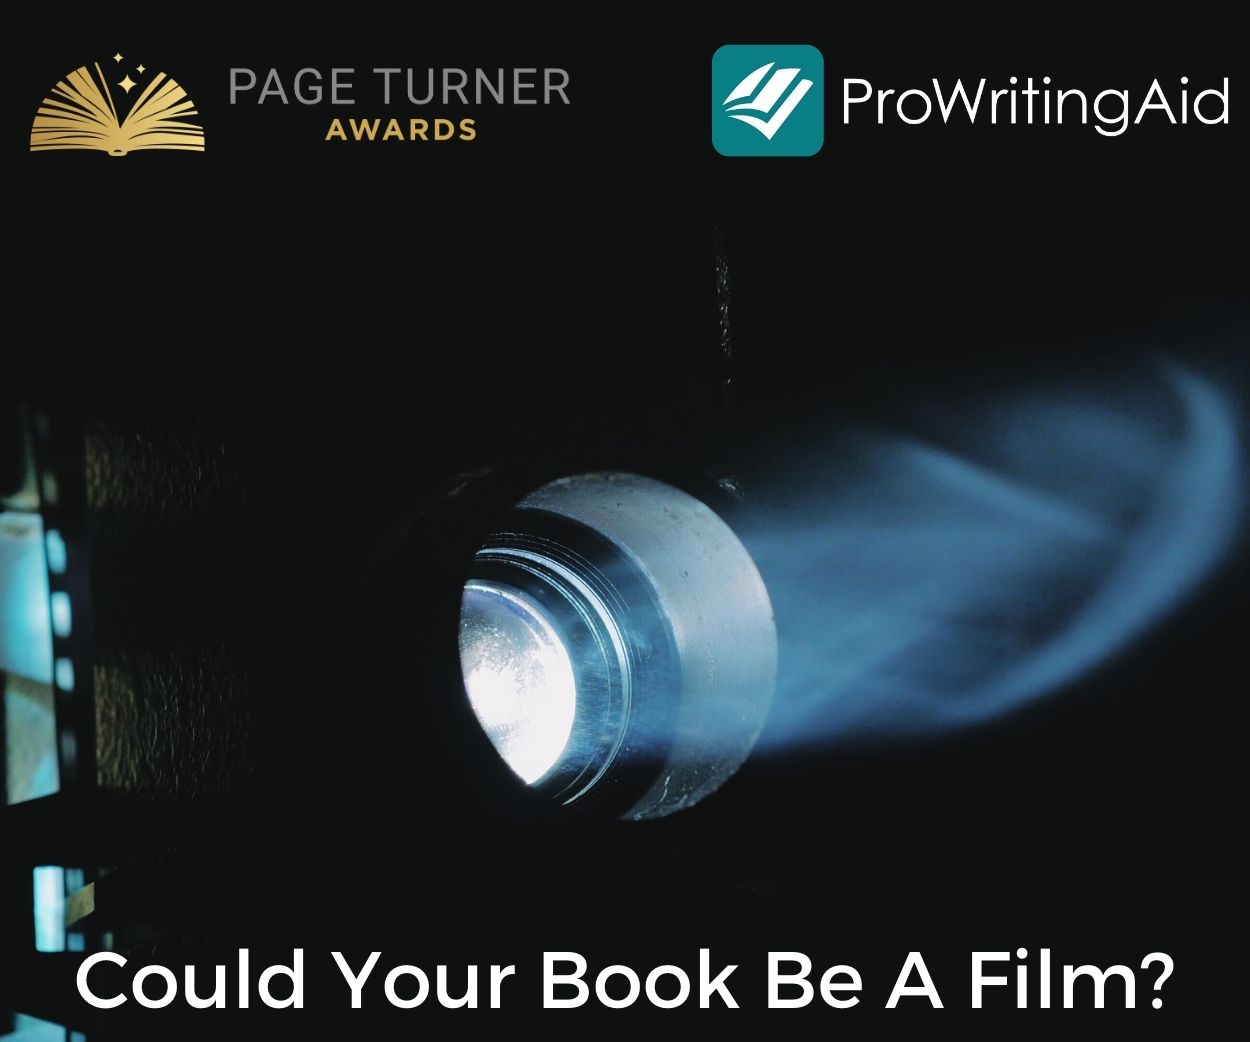 could your book become a film?